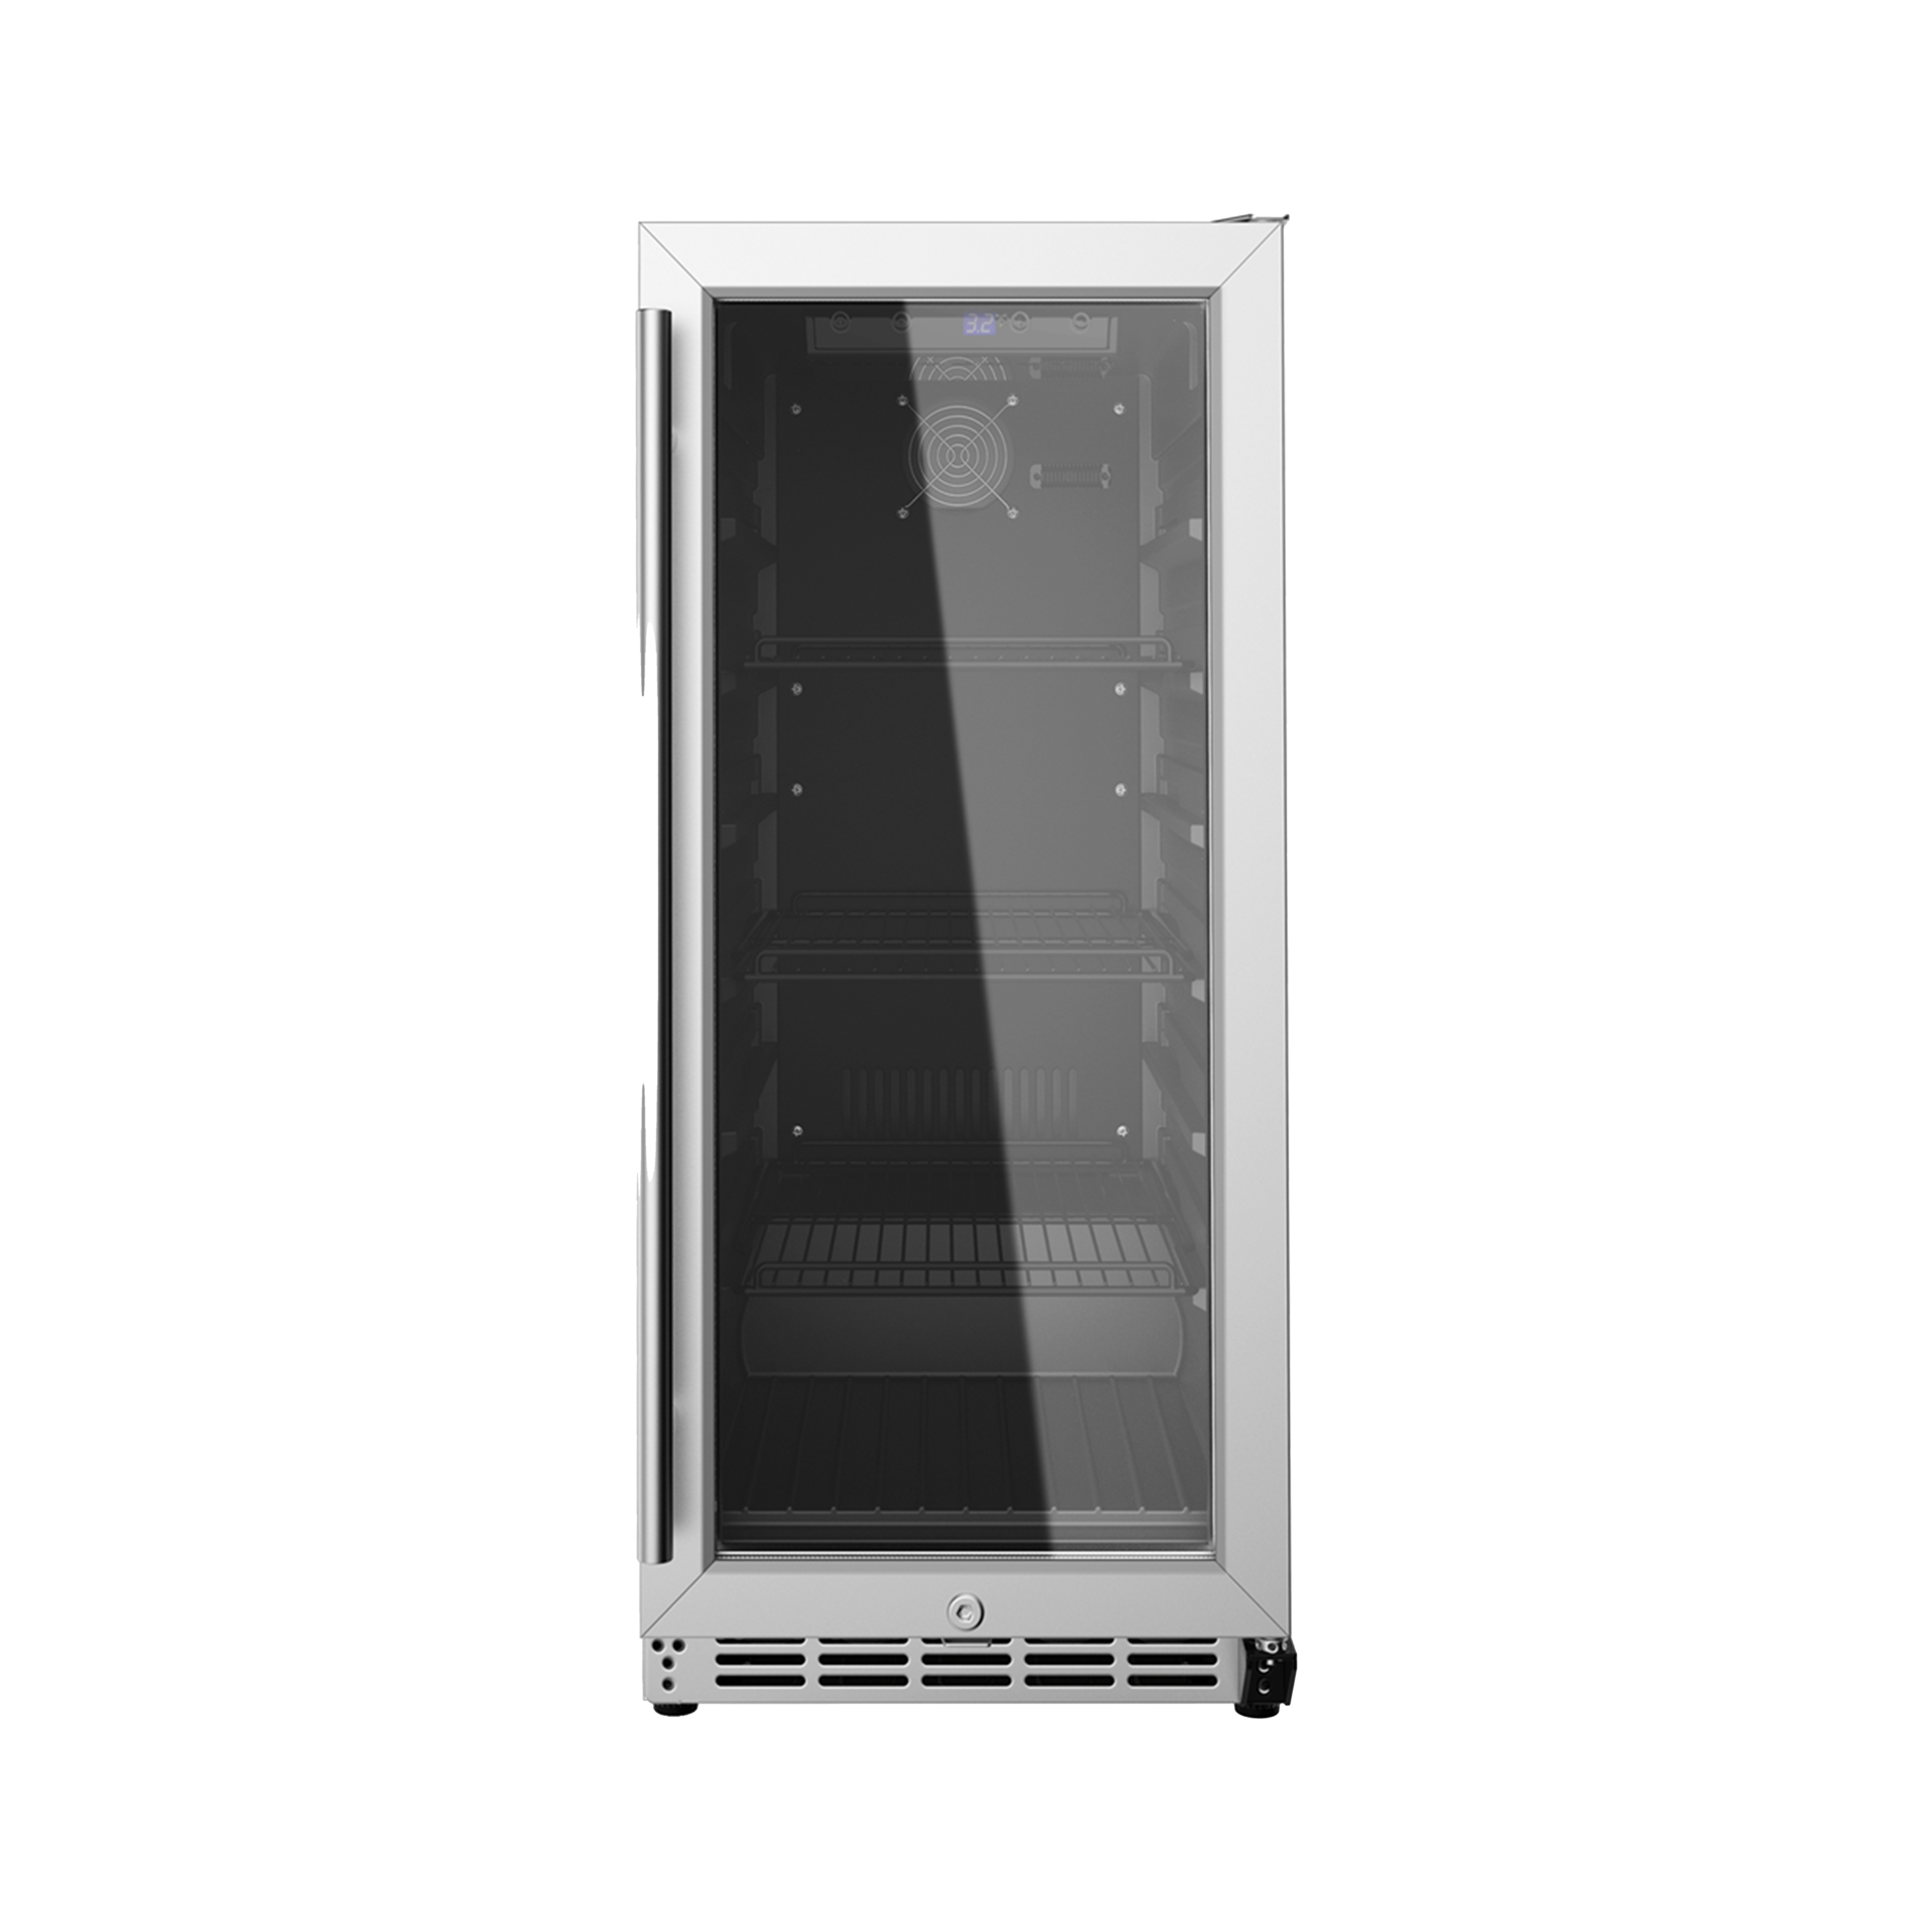 Front view of a 3.2 Cu Ft Compact Beverage Outdoor Refrigerator 96 cans with transparent door. The content of the fridge can be seen through the door